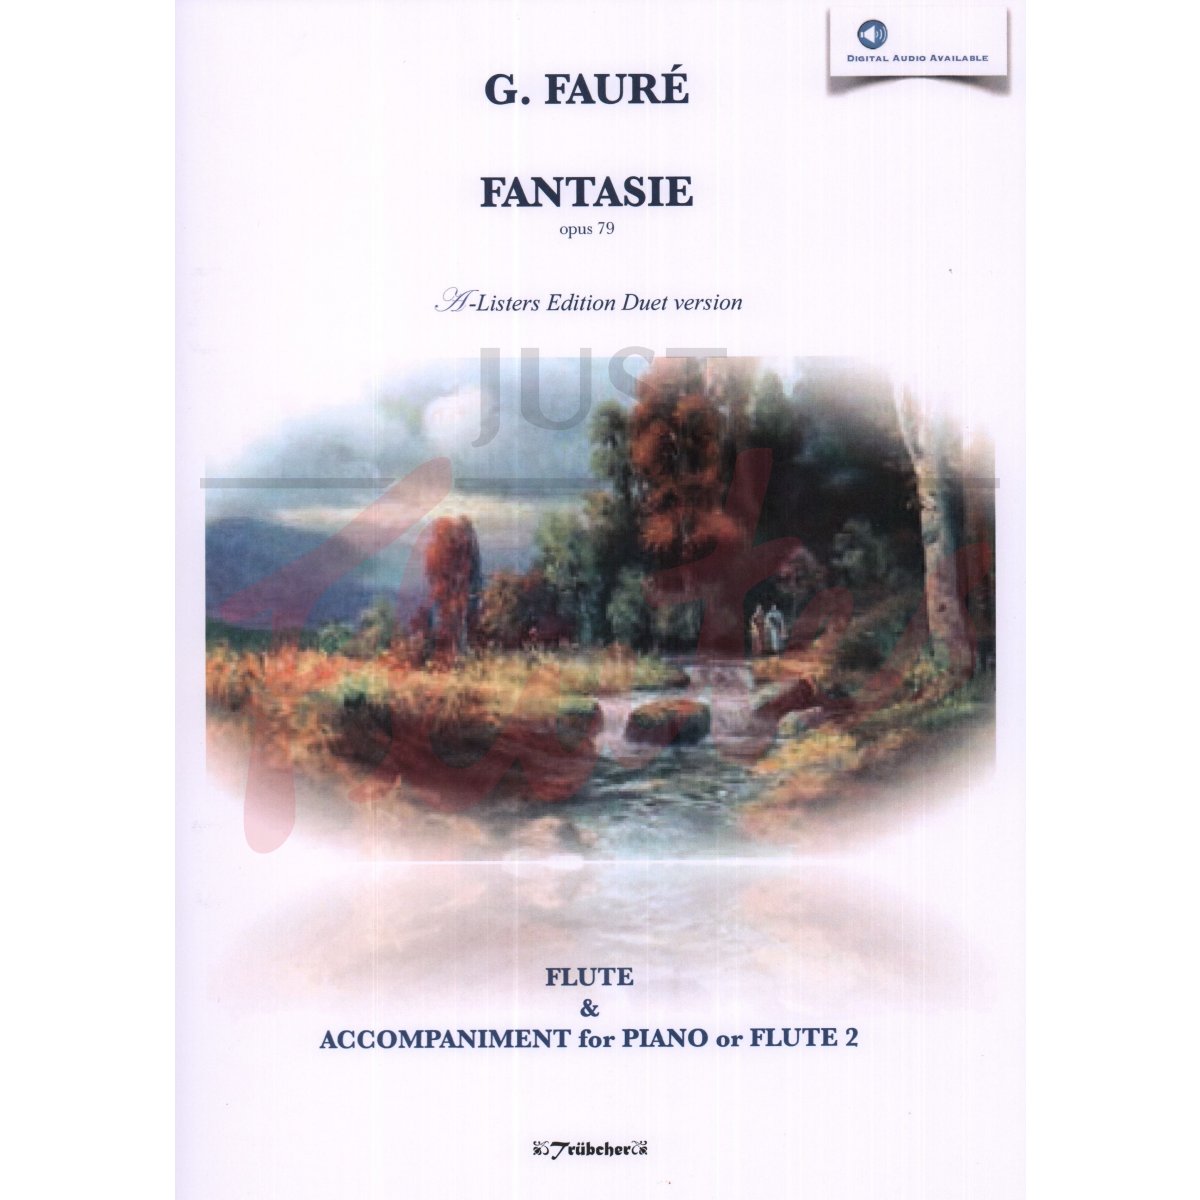 Fantasie for Flute and Piano (optional Second Flute)